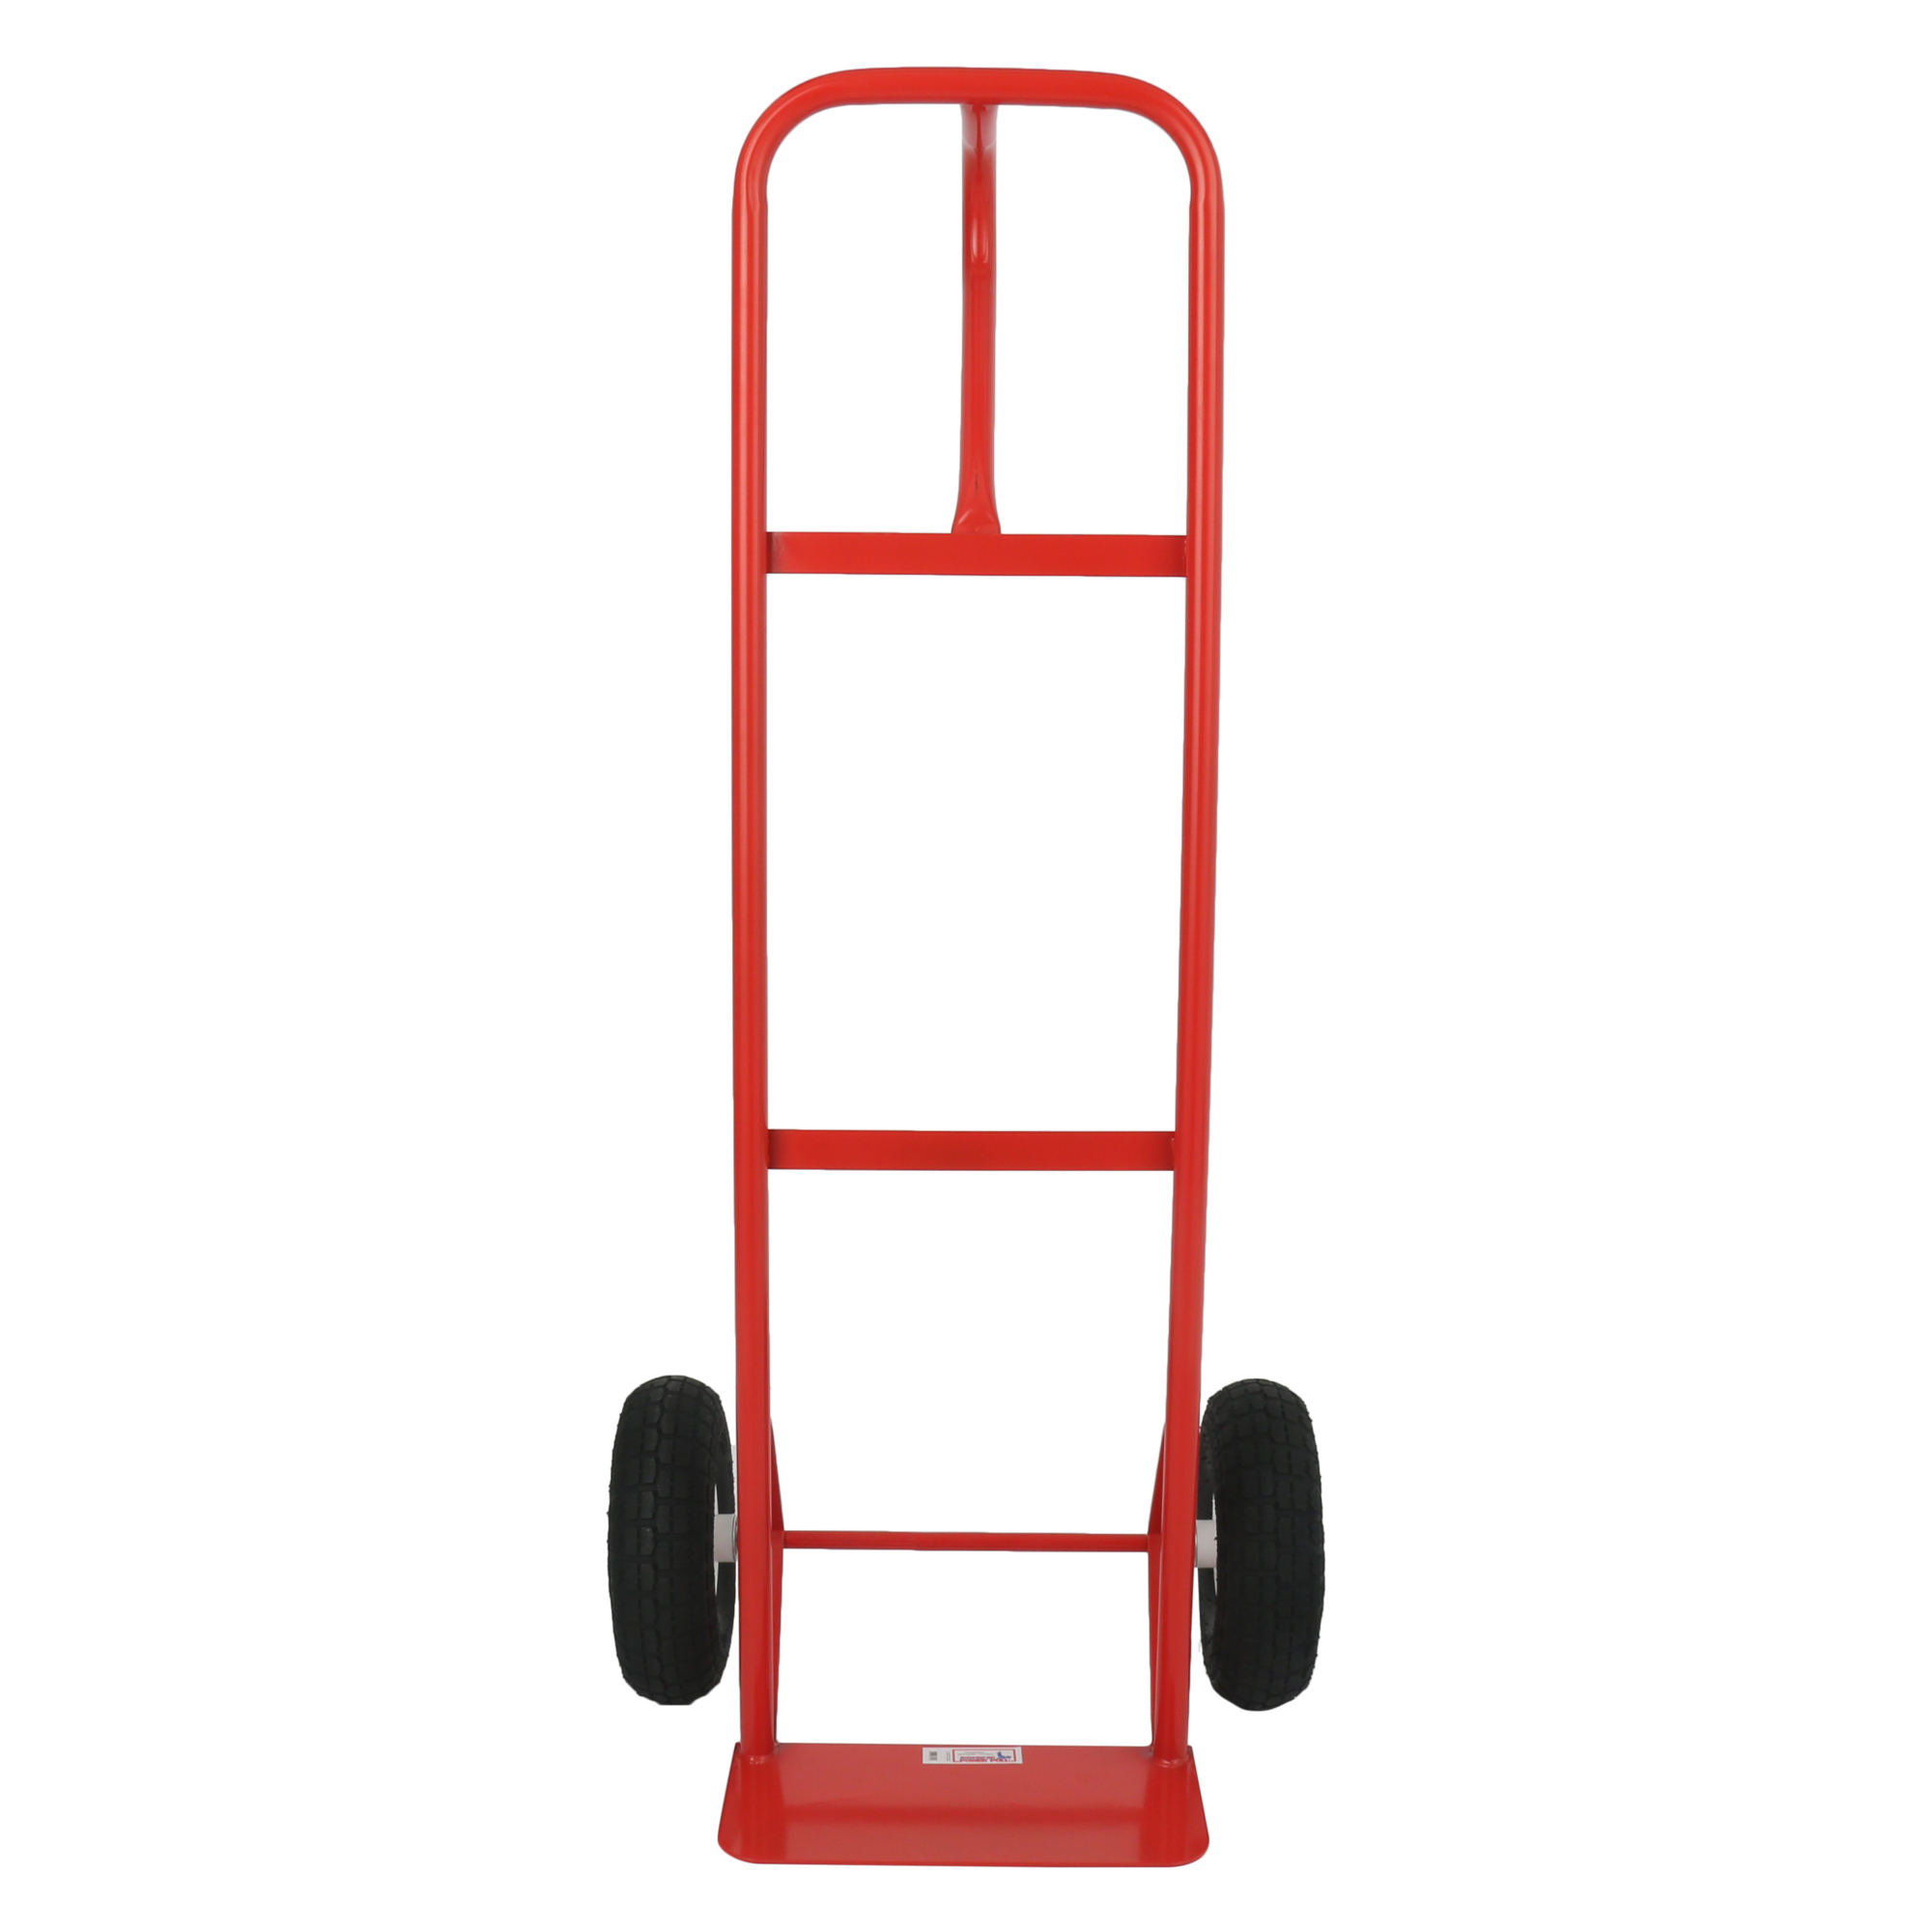 American Power Pull, 600 lbs. Hand Truck Pneumatic Tires, Load Capacity 600 lb, Material Steel, Model 3399